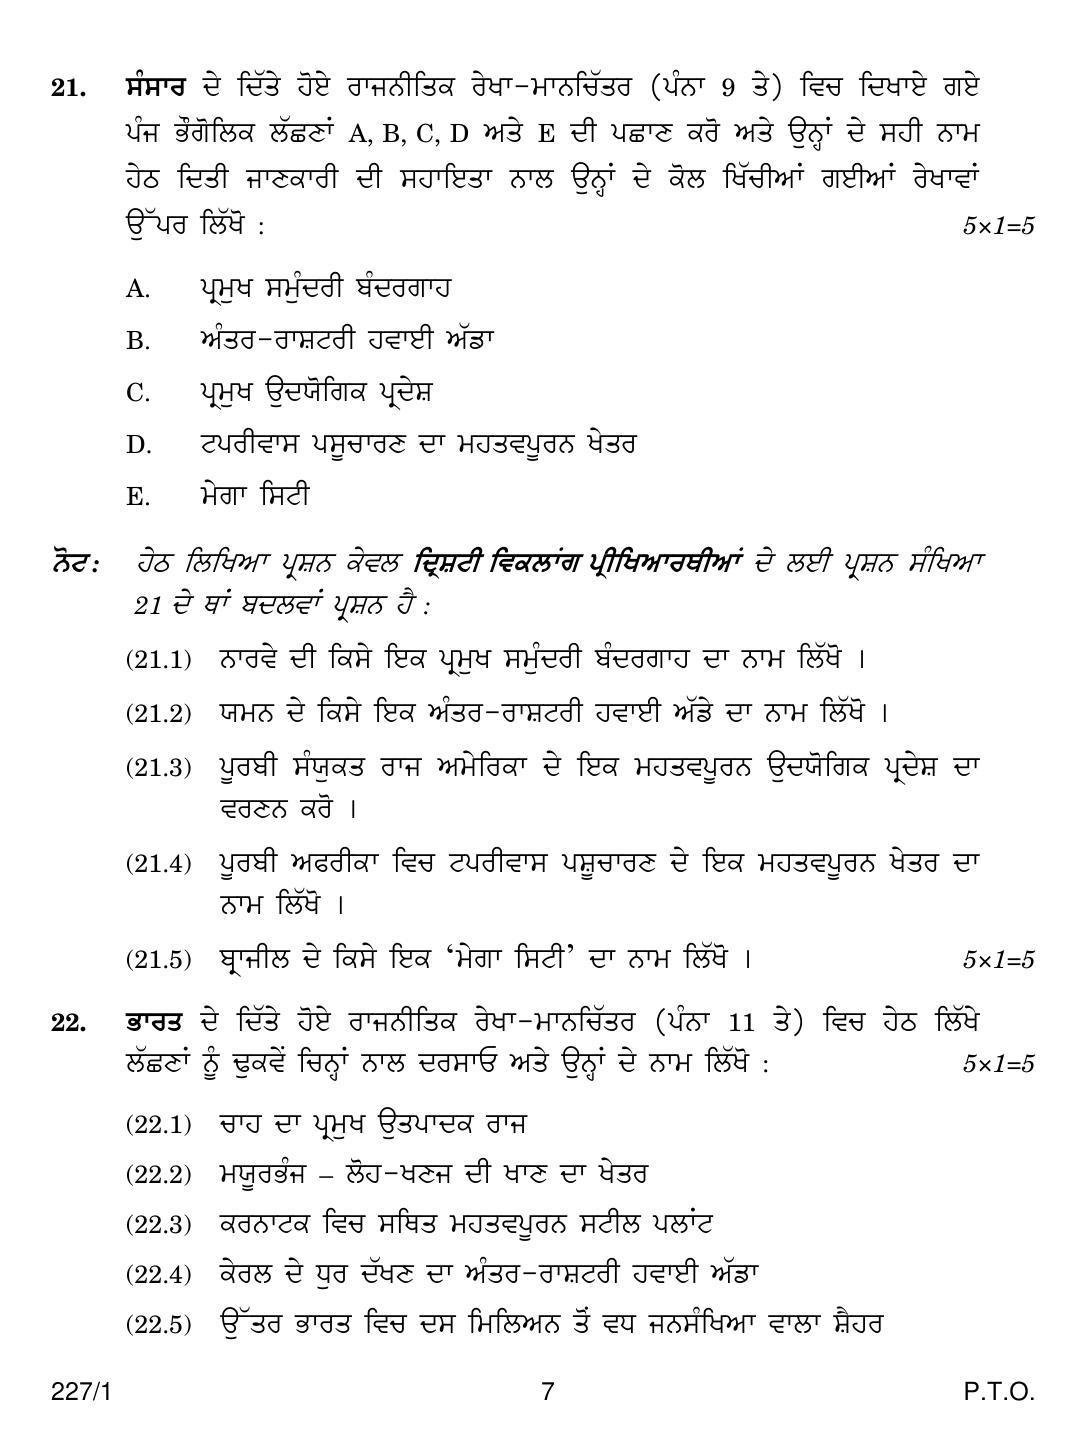 CBSE Class 12 227-1 GEOGRAPHY PUNJABI VERSION 2018 Question Paper - Page 7